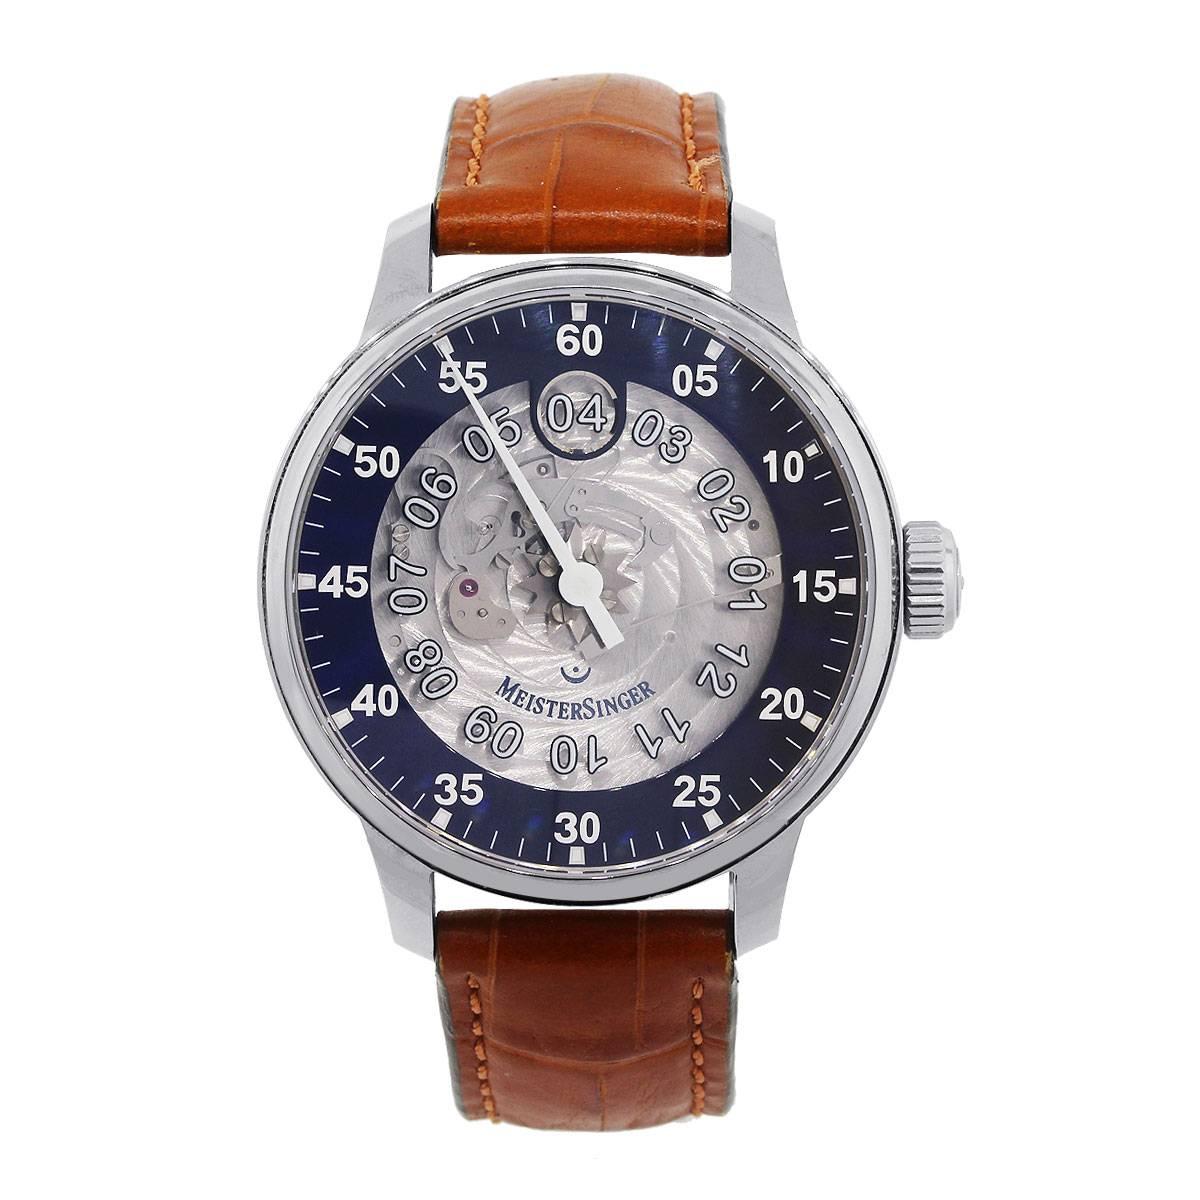 Brand: Meistersinger
MPN: SAM908TR
Model: Salthora Meta Transparent
Case Material: Stainless Steel
Crystal: Sapphire
Case Diameter: 43mm
Dial: Silvered transparent dial with numerical markers
Bracelet: Brown Leather
Size: Will fit a size 8″